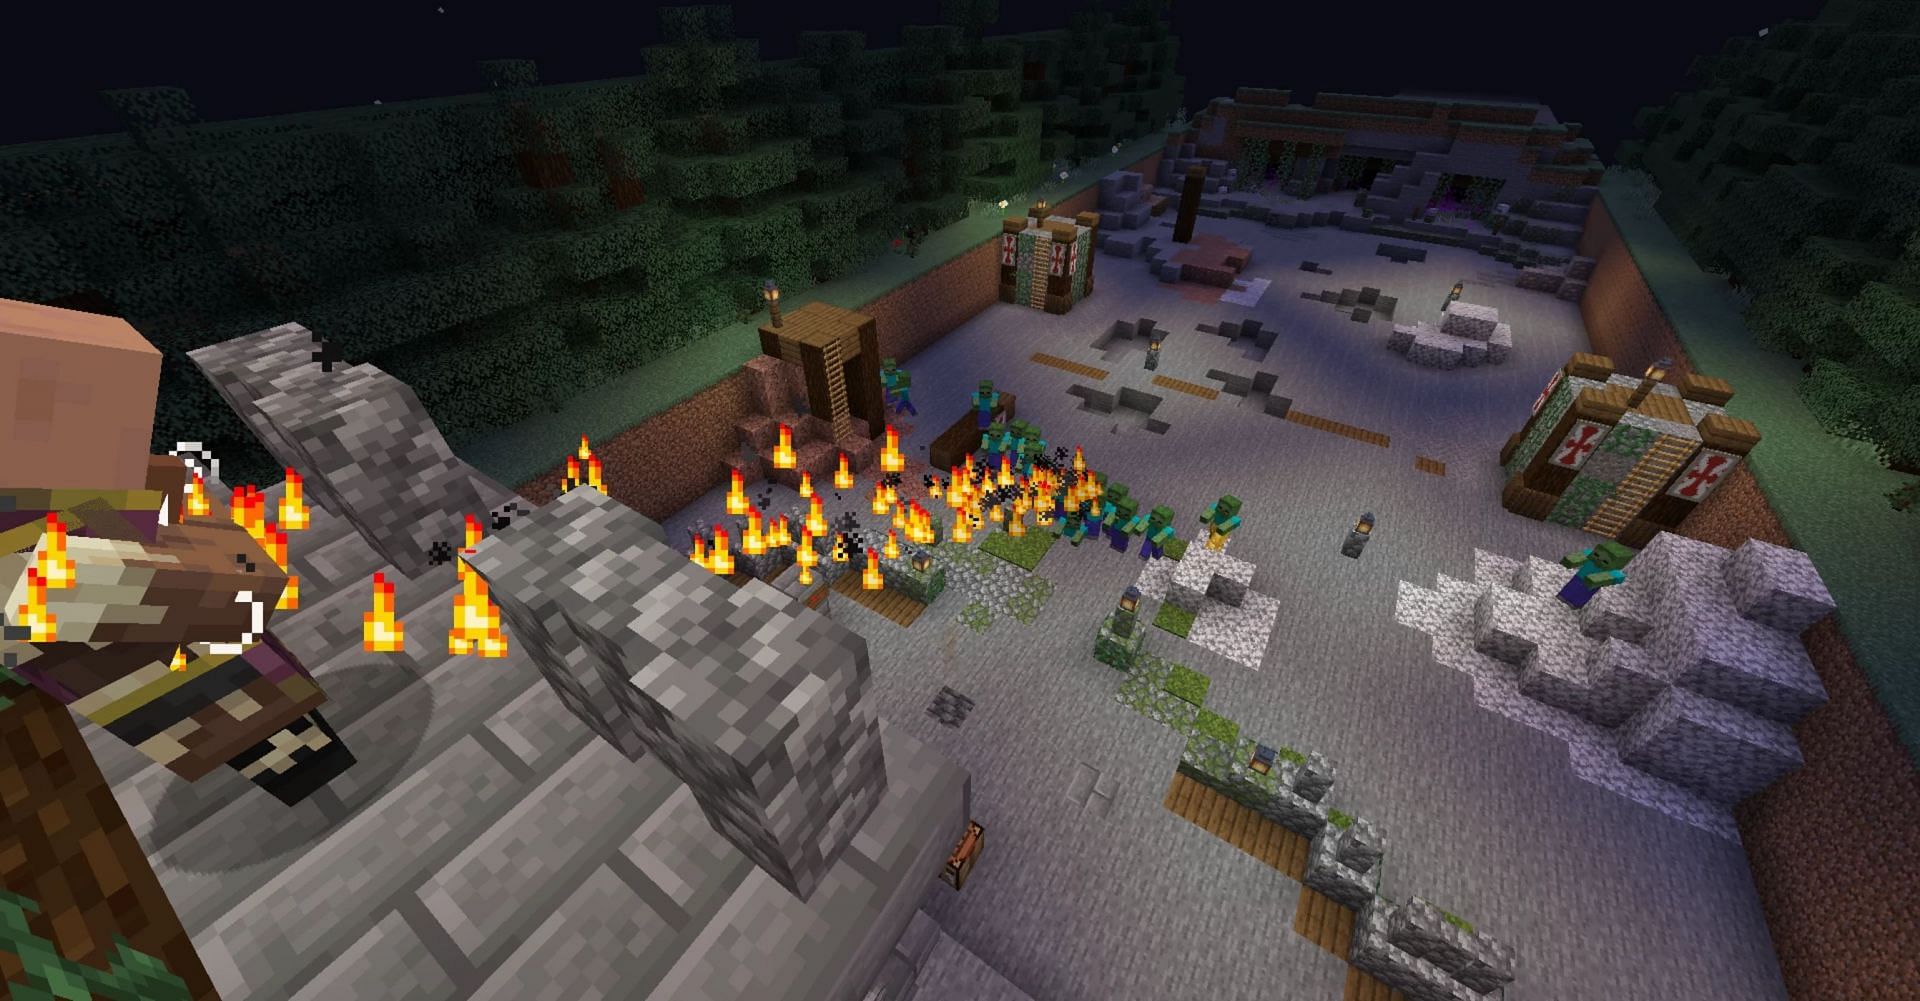 Monster Defense is excellent for 4-player co-op action (Image via JekNJok/PlanetMinecraft)